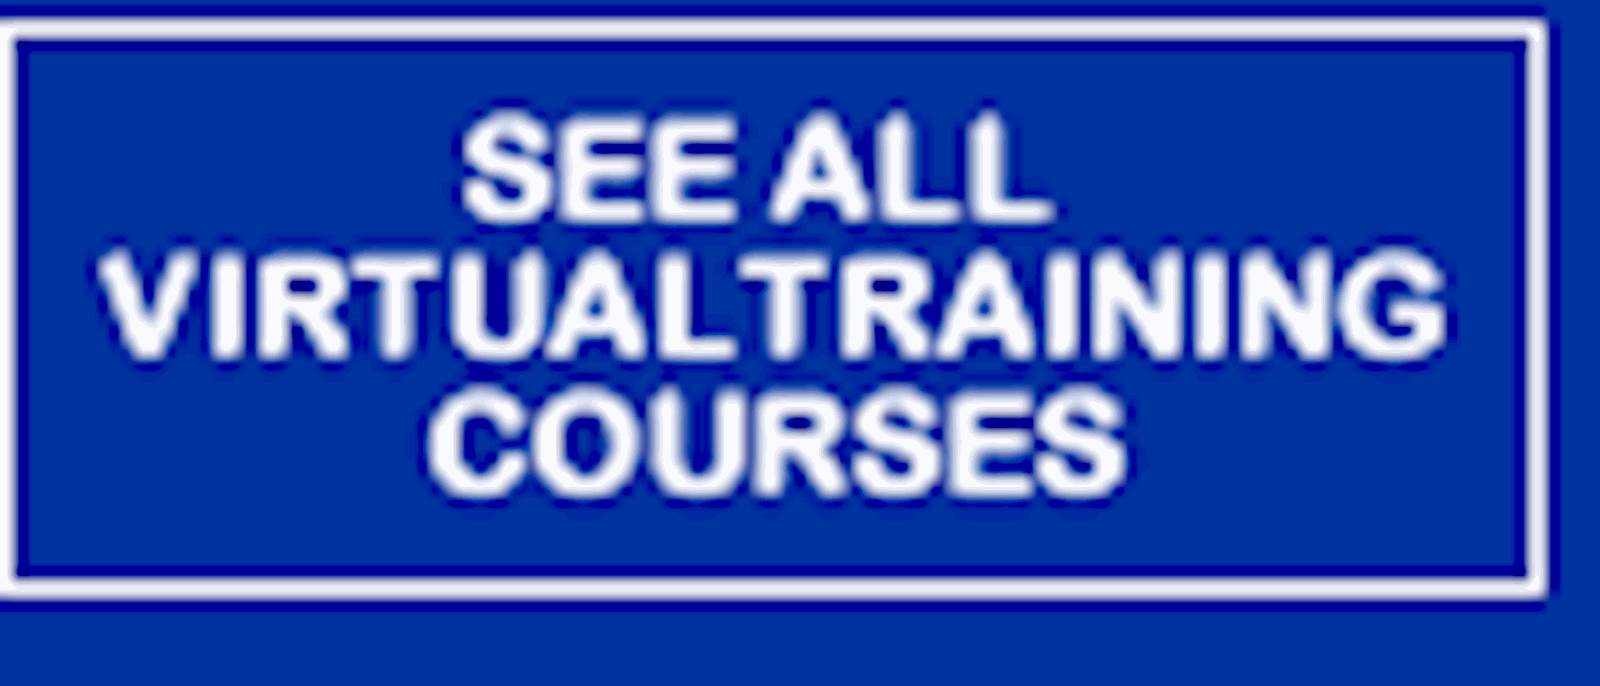 See all Virtual Training courses